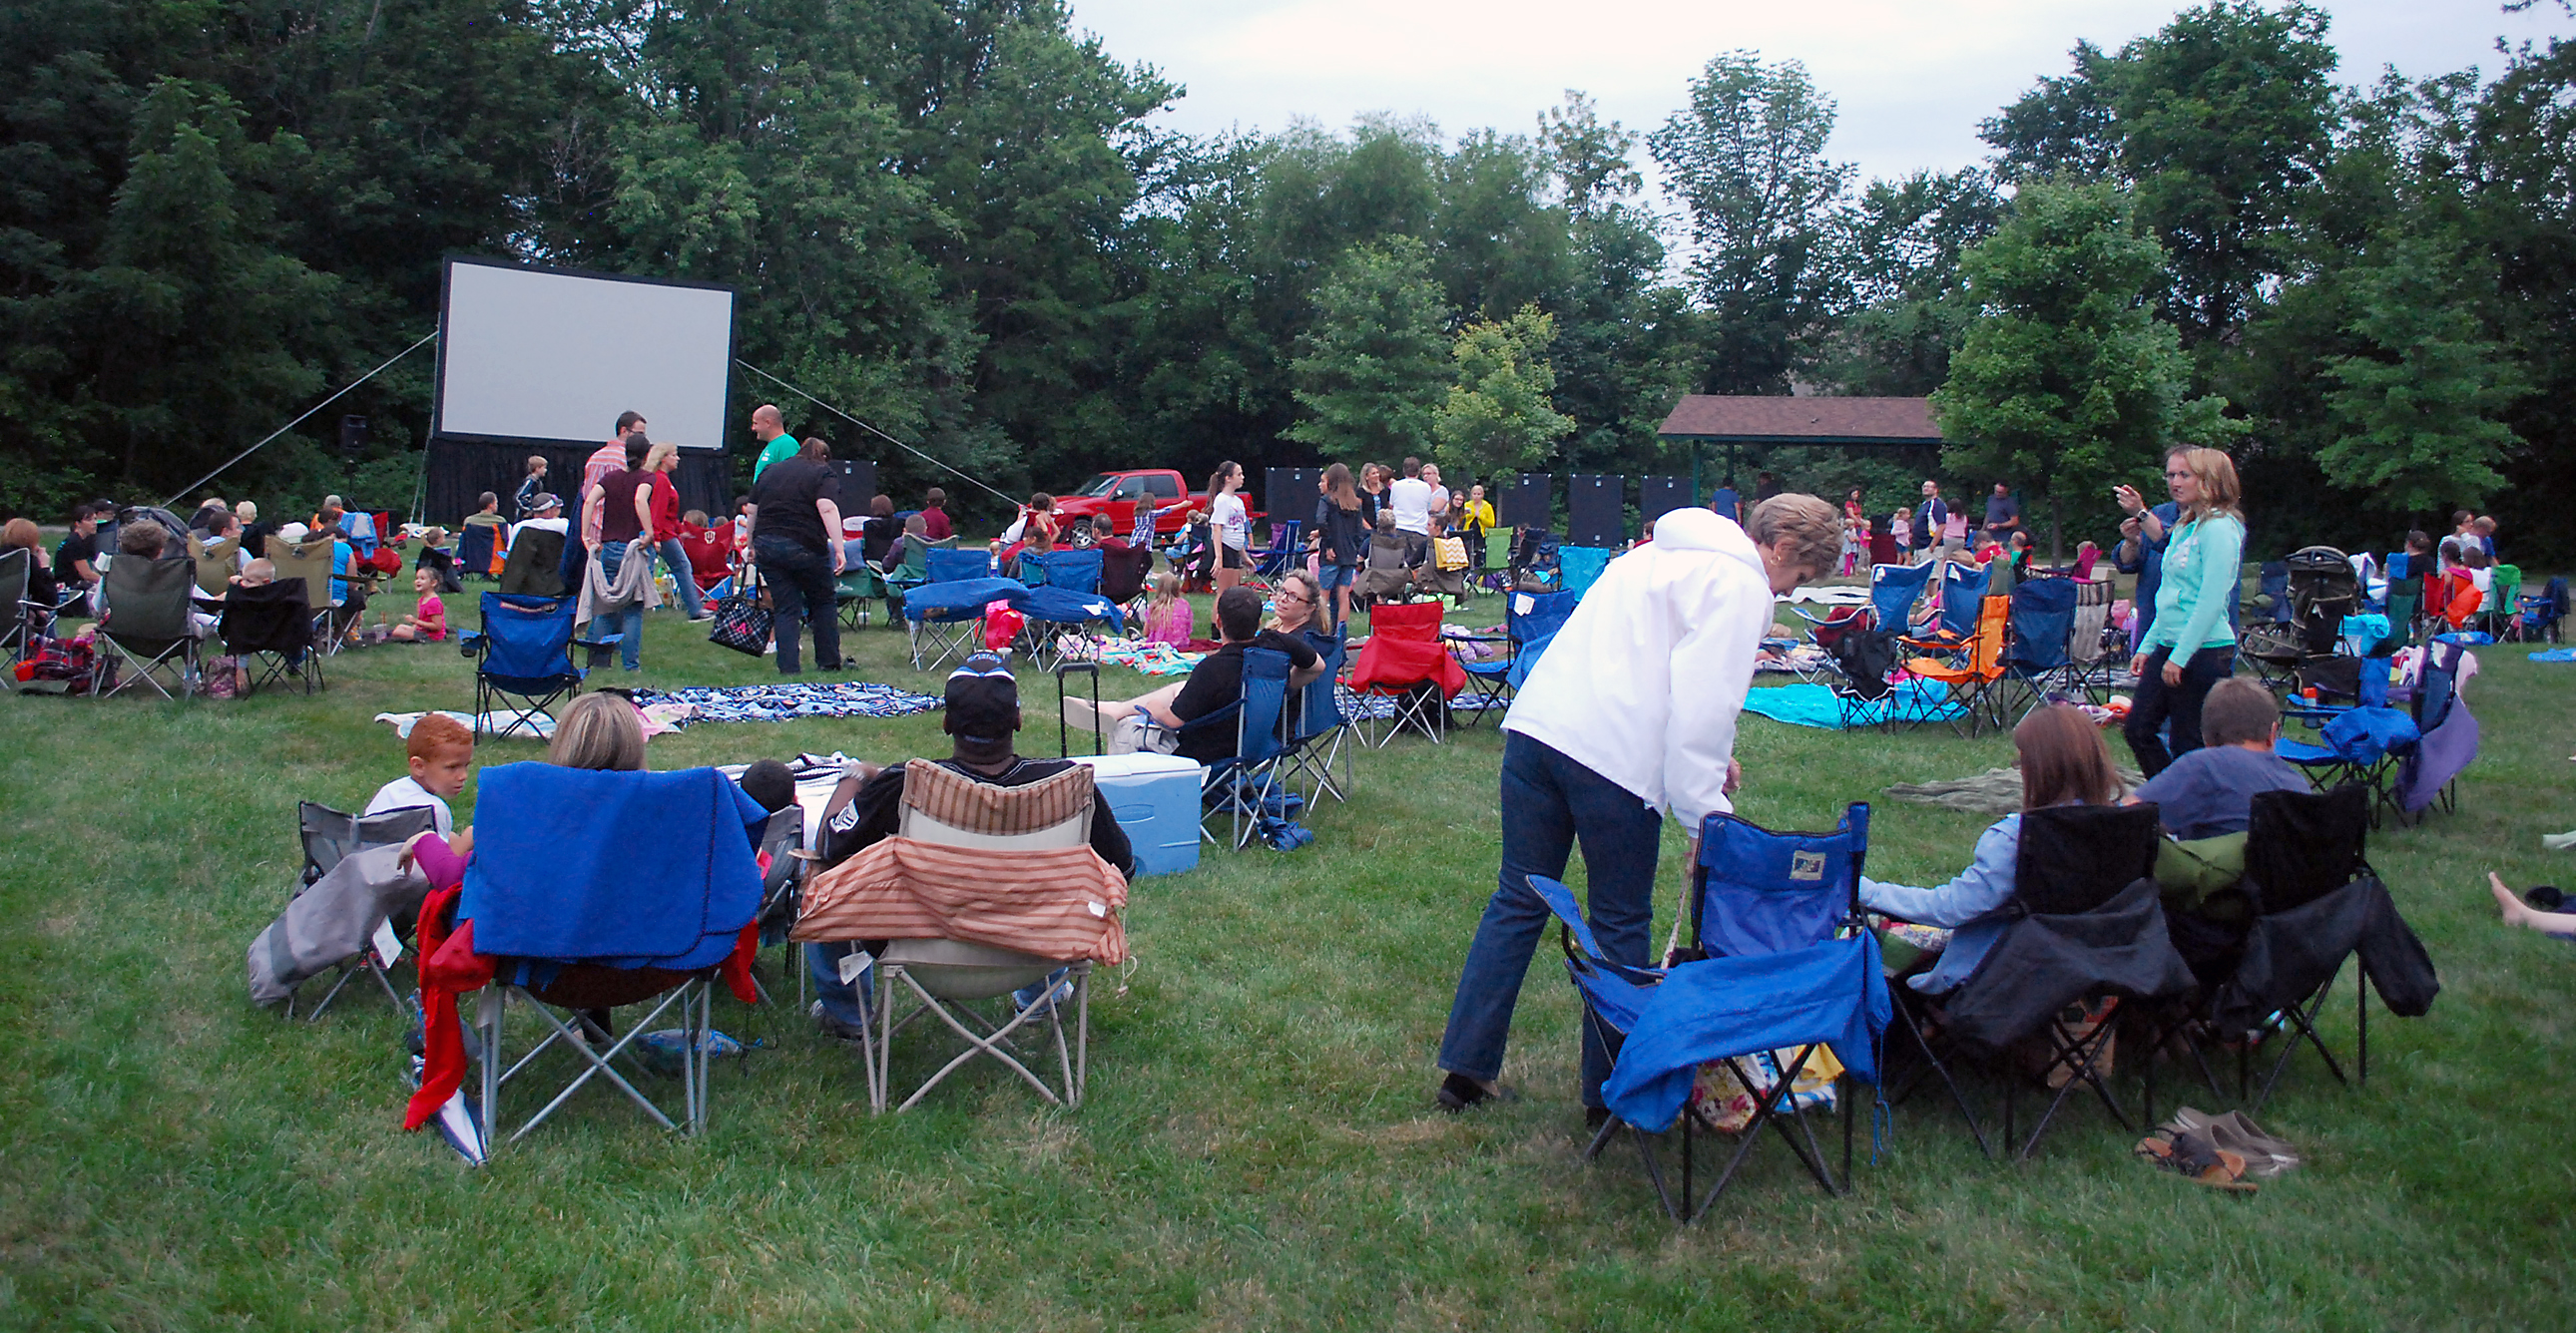 Community members prepare their seats and await the start of “Brave” at Asa Bales Park during last year’s inaugural movie series kickoff. (File photo by Robert Herrington)